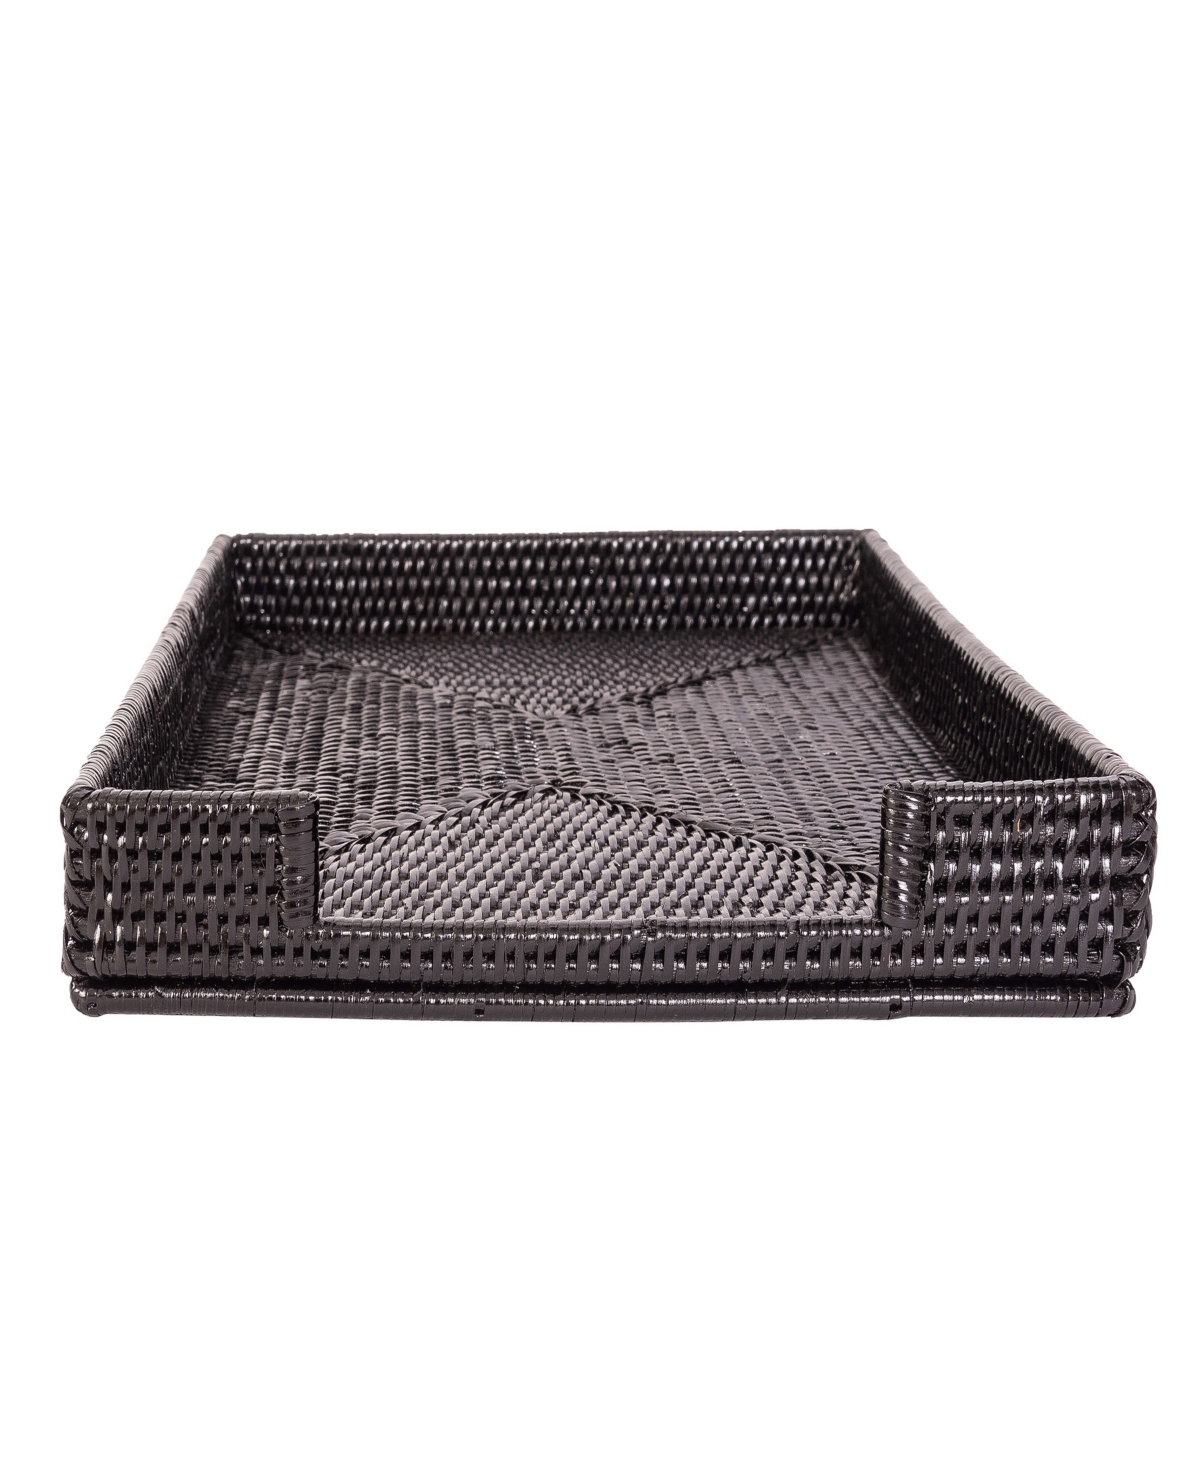 ARTIFACTS TRADING COMPANY RATTAN OFFICE PAPER TRAY